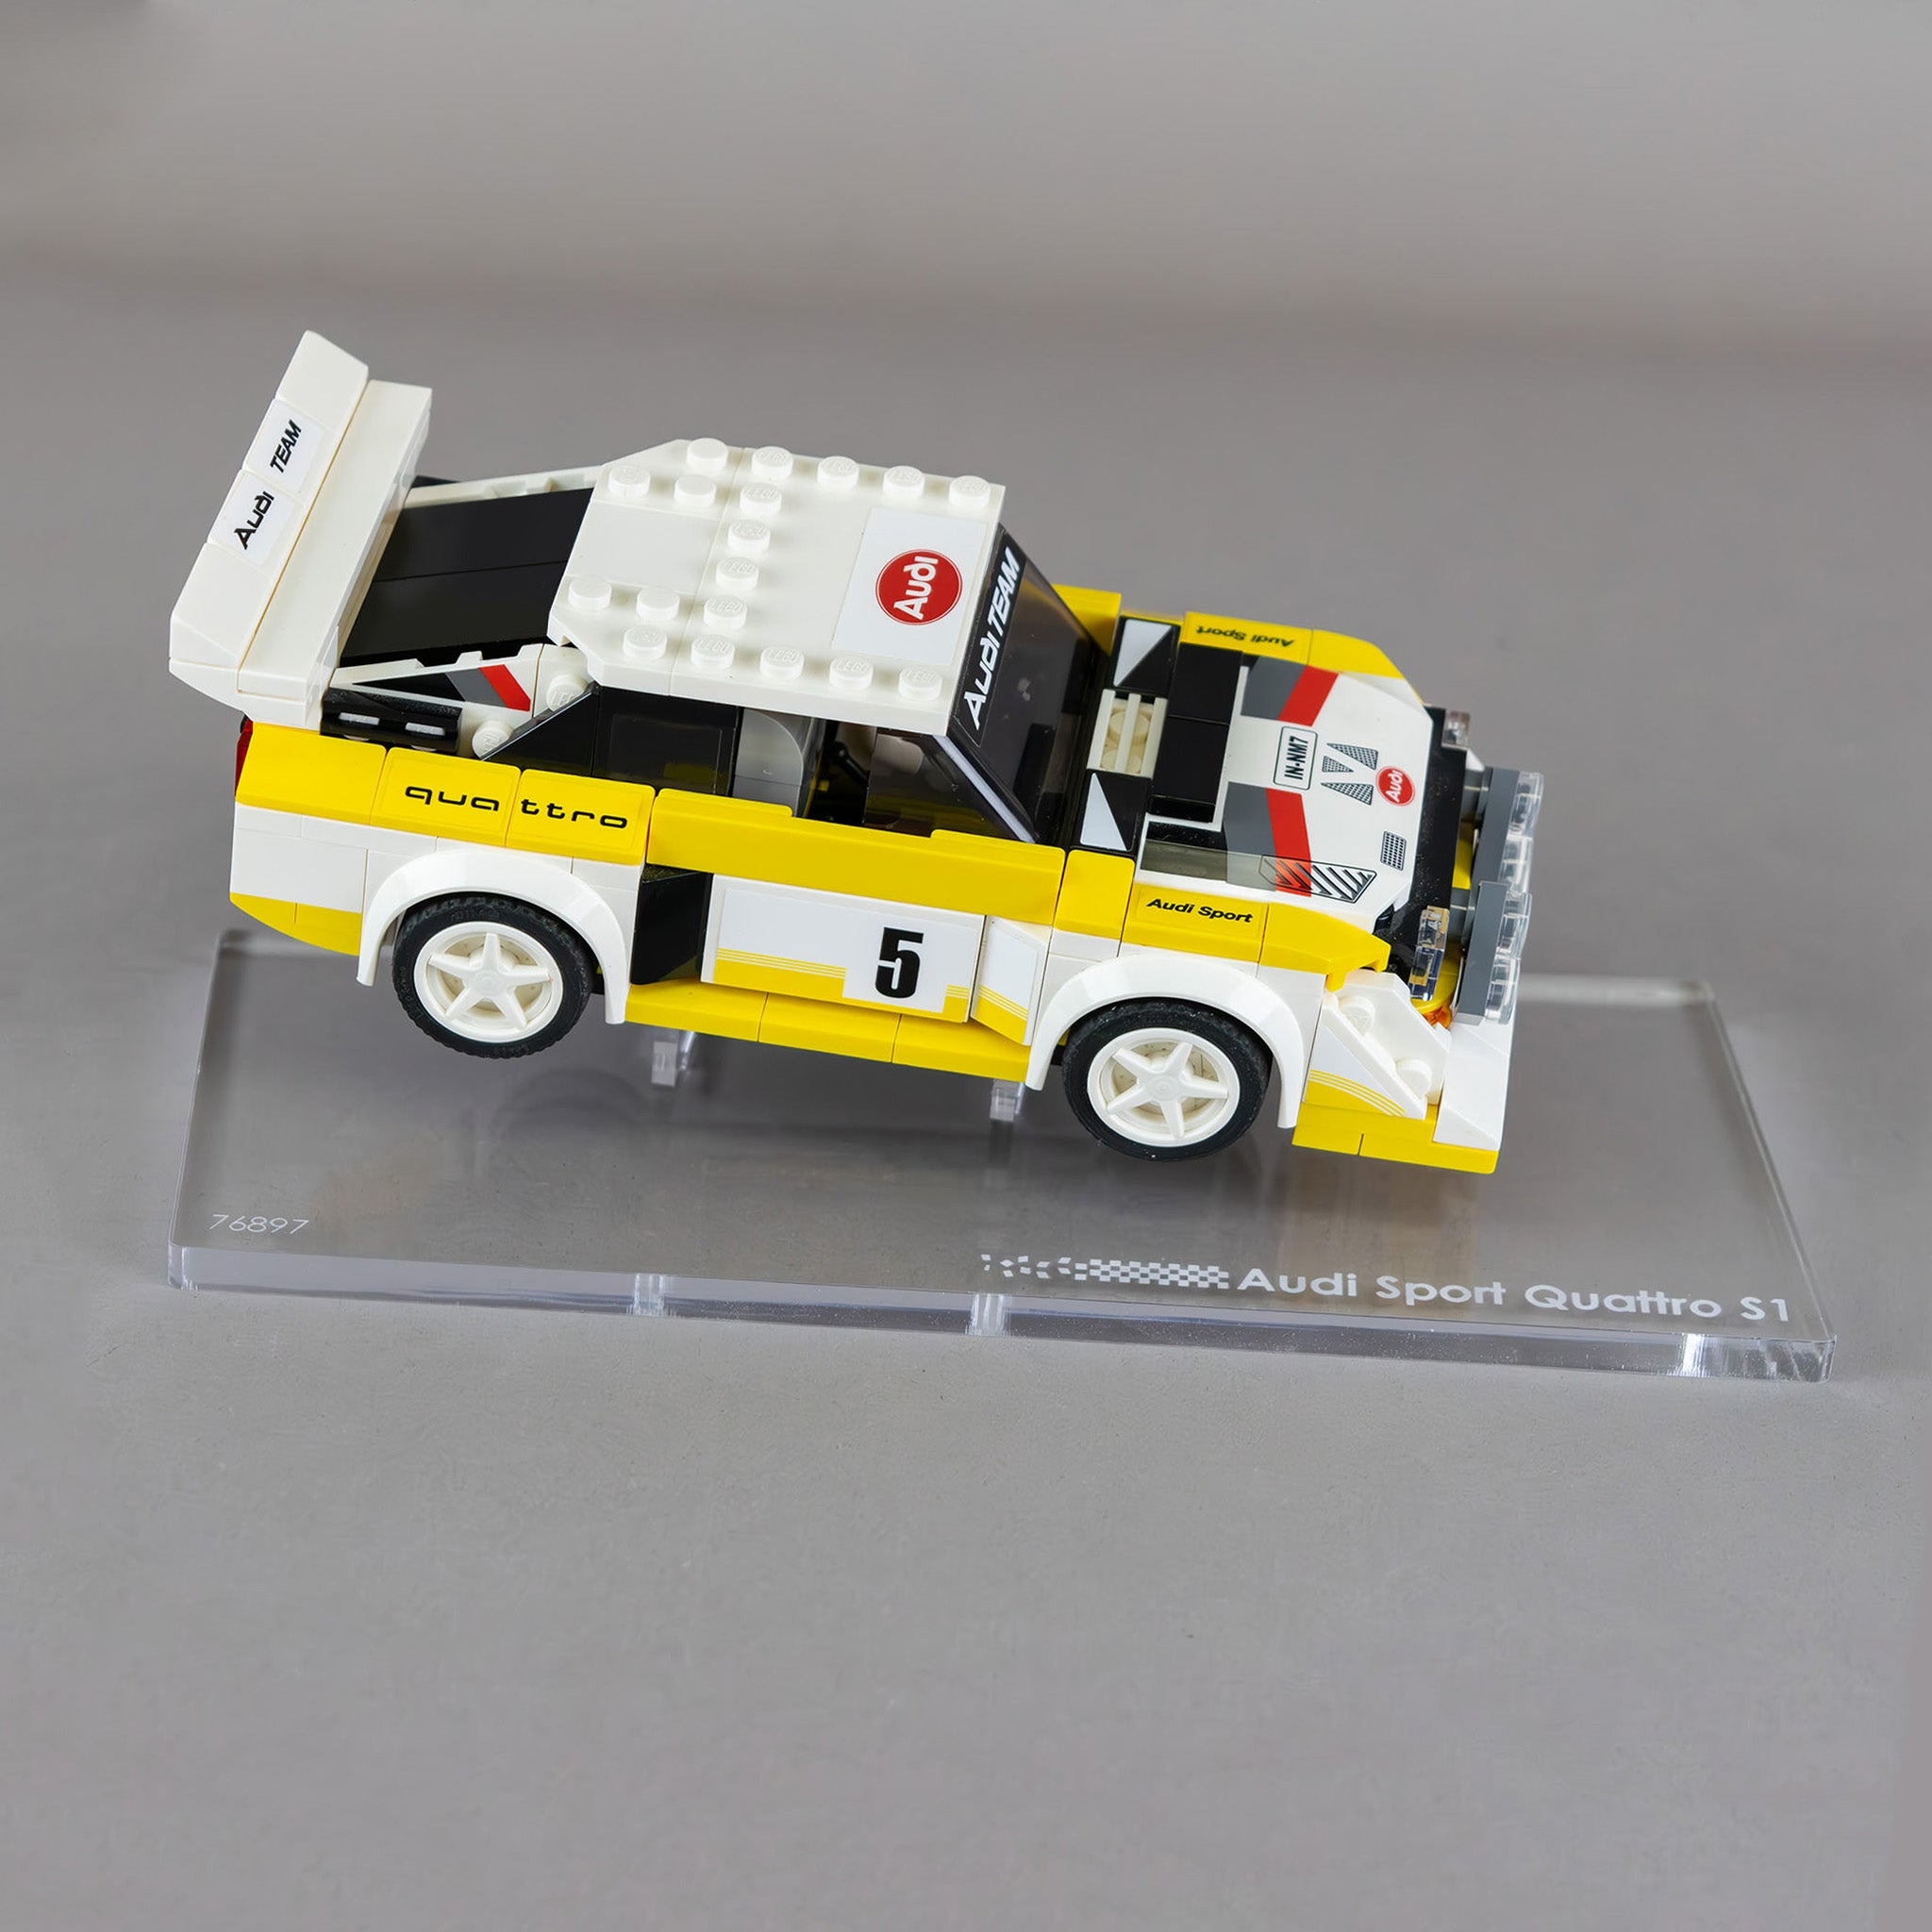 Displays for LEGO Speed Champions (8 Stud) – Rose Colored Gaming